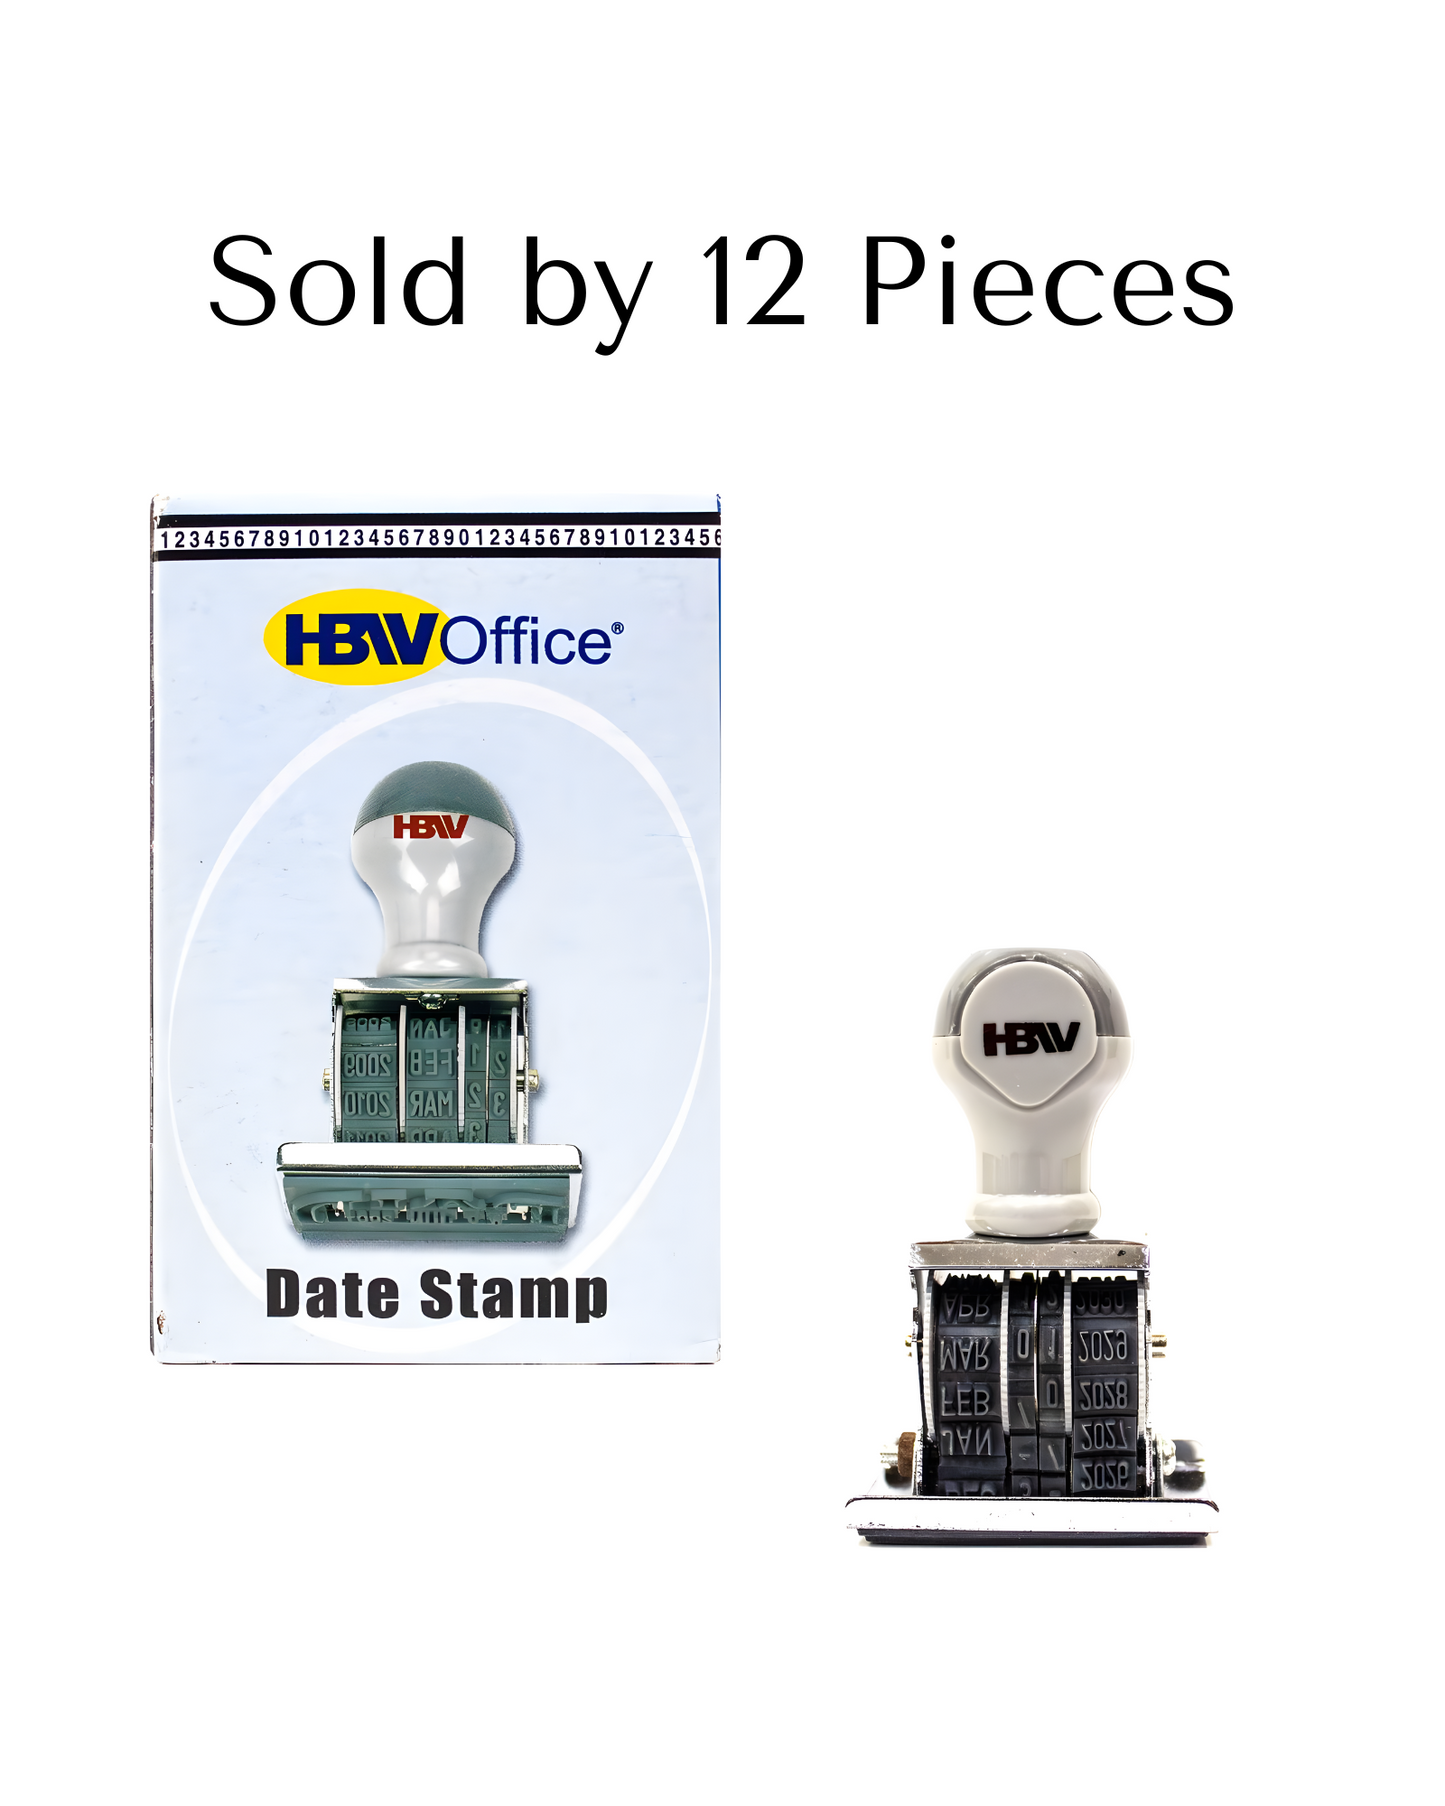 HBW Received Dater Stamp DSP-R1 (12pcs)